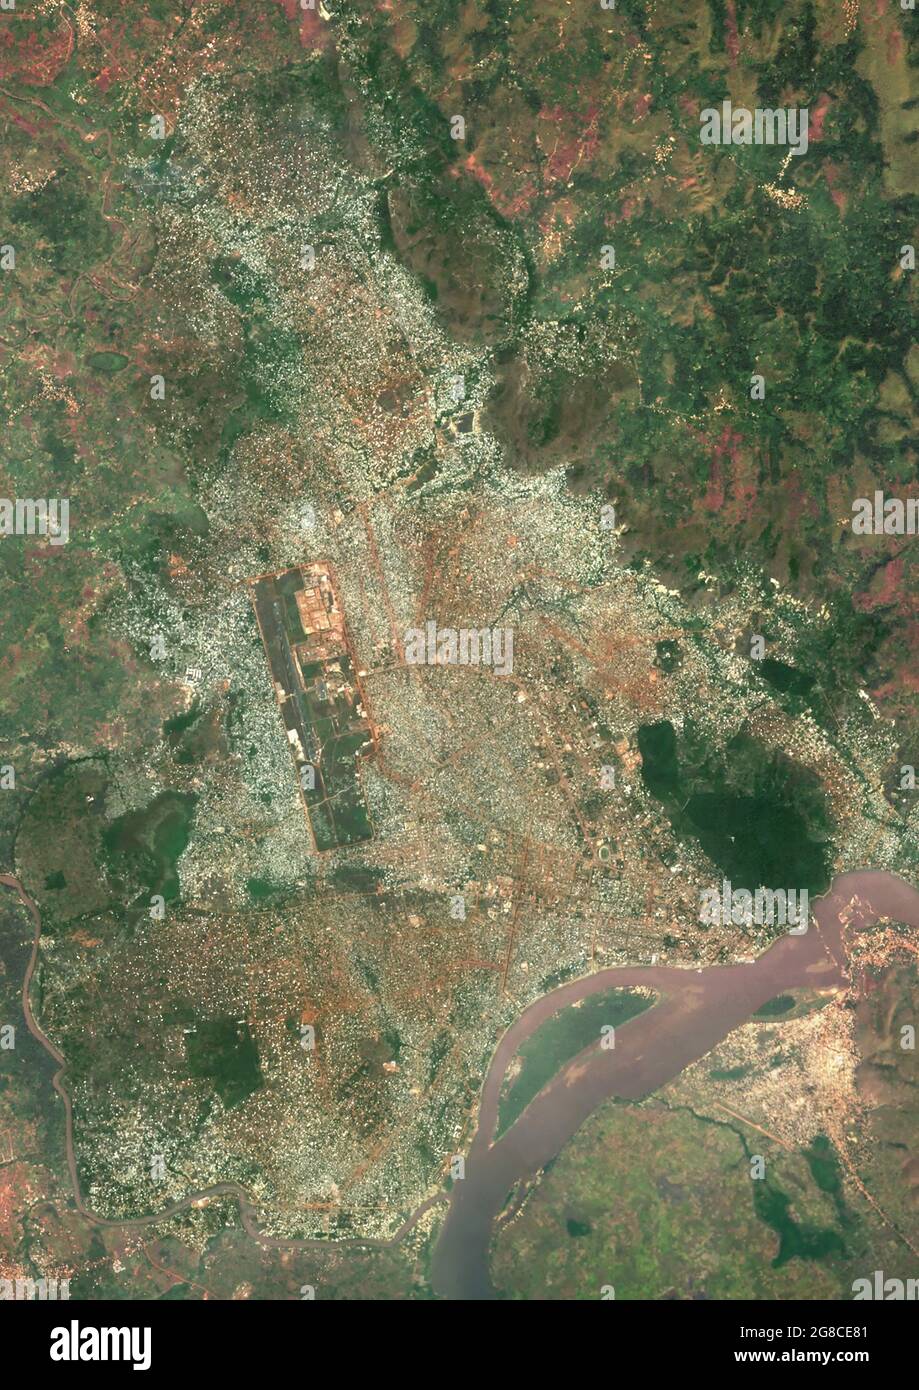 Bangui, Capital city of Central African Republic Stock Photo